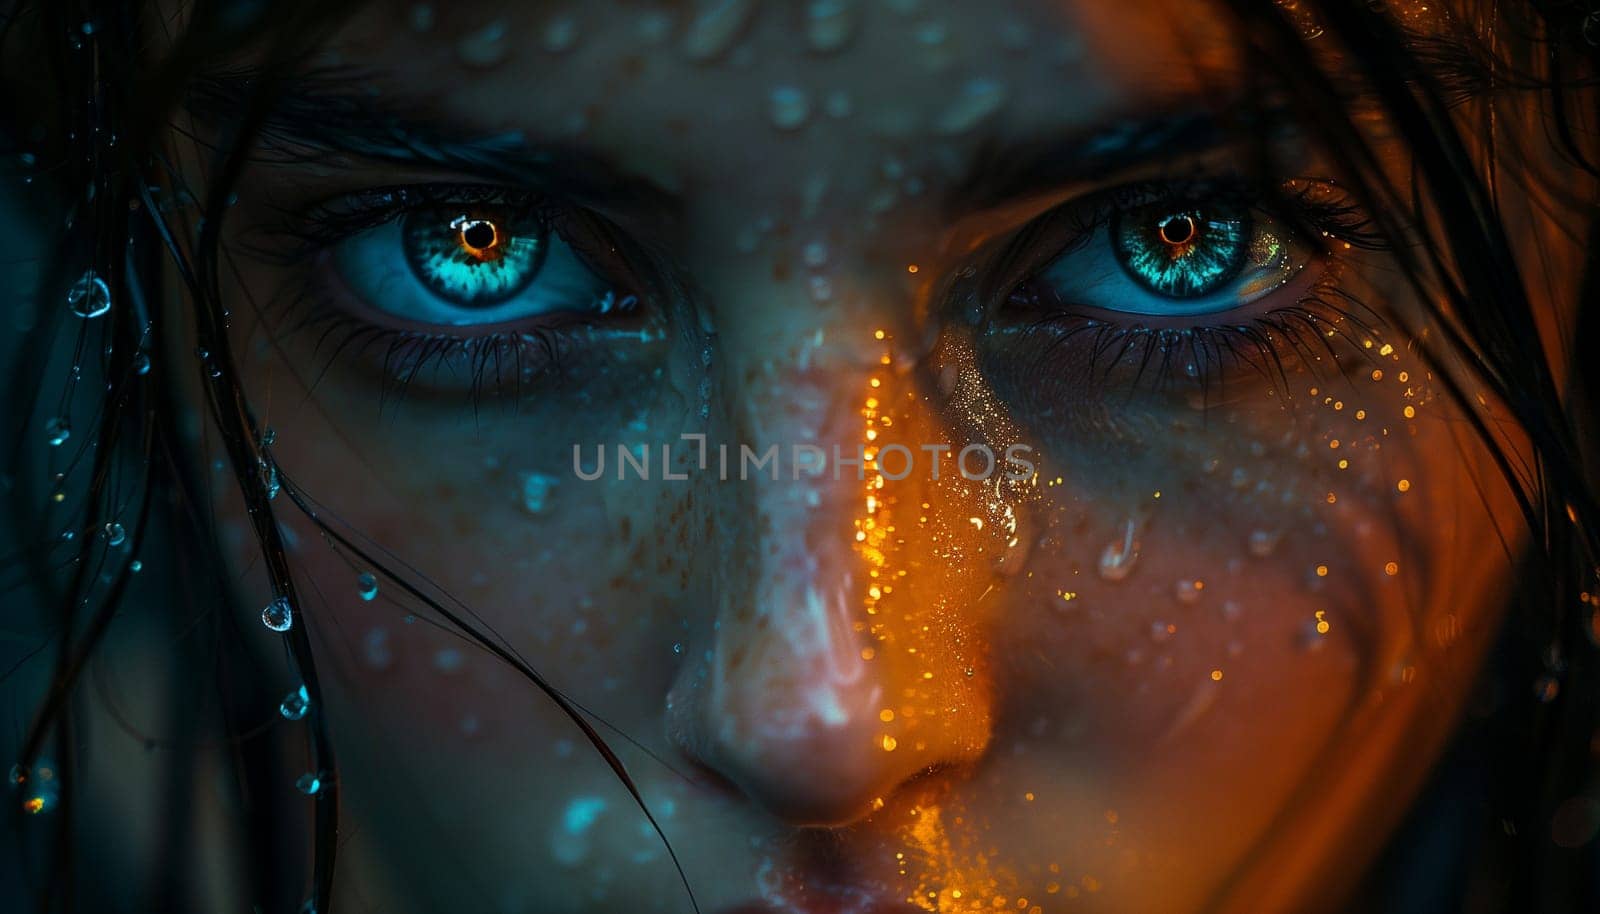 Colorful cinematic close-up photo of a girl's eyes . High quality photo